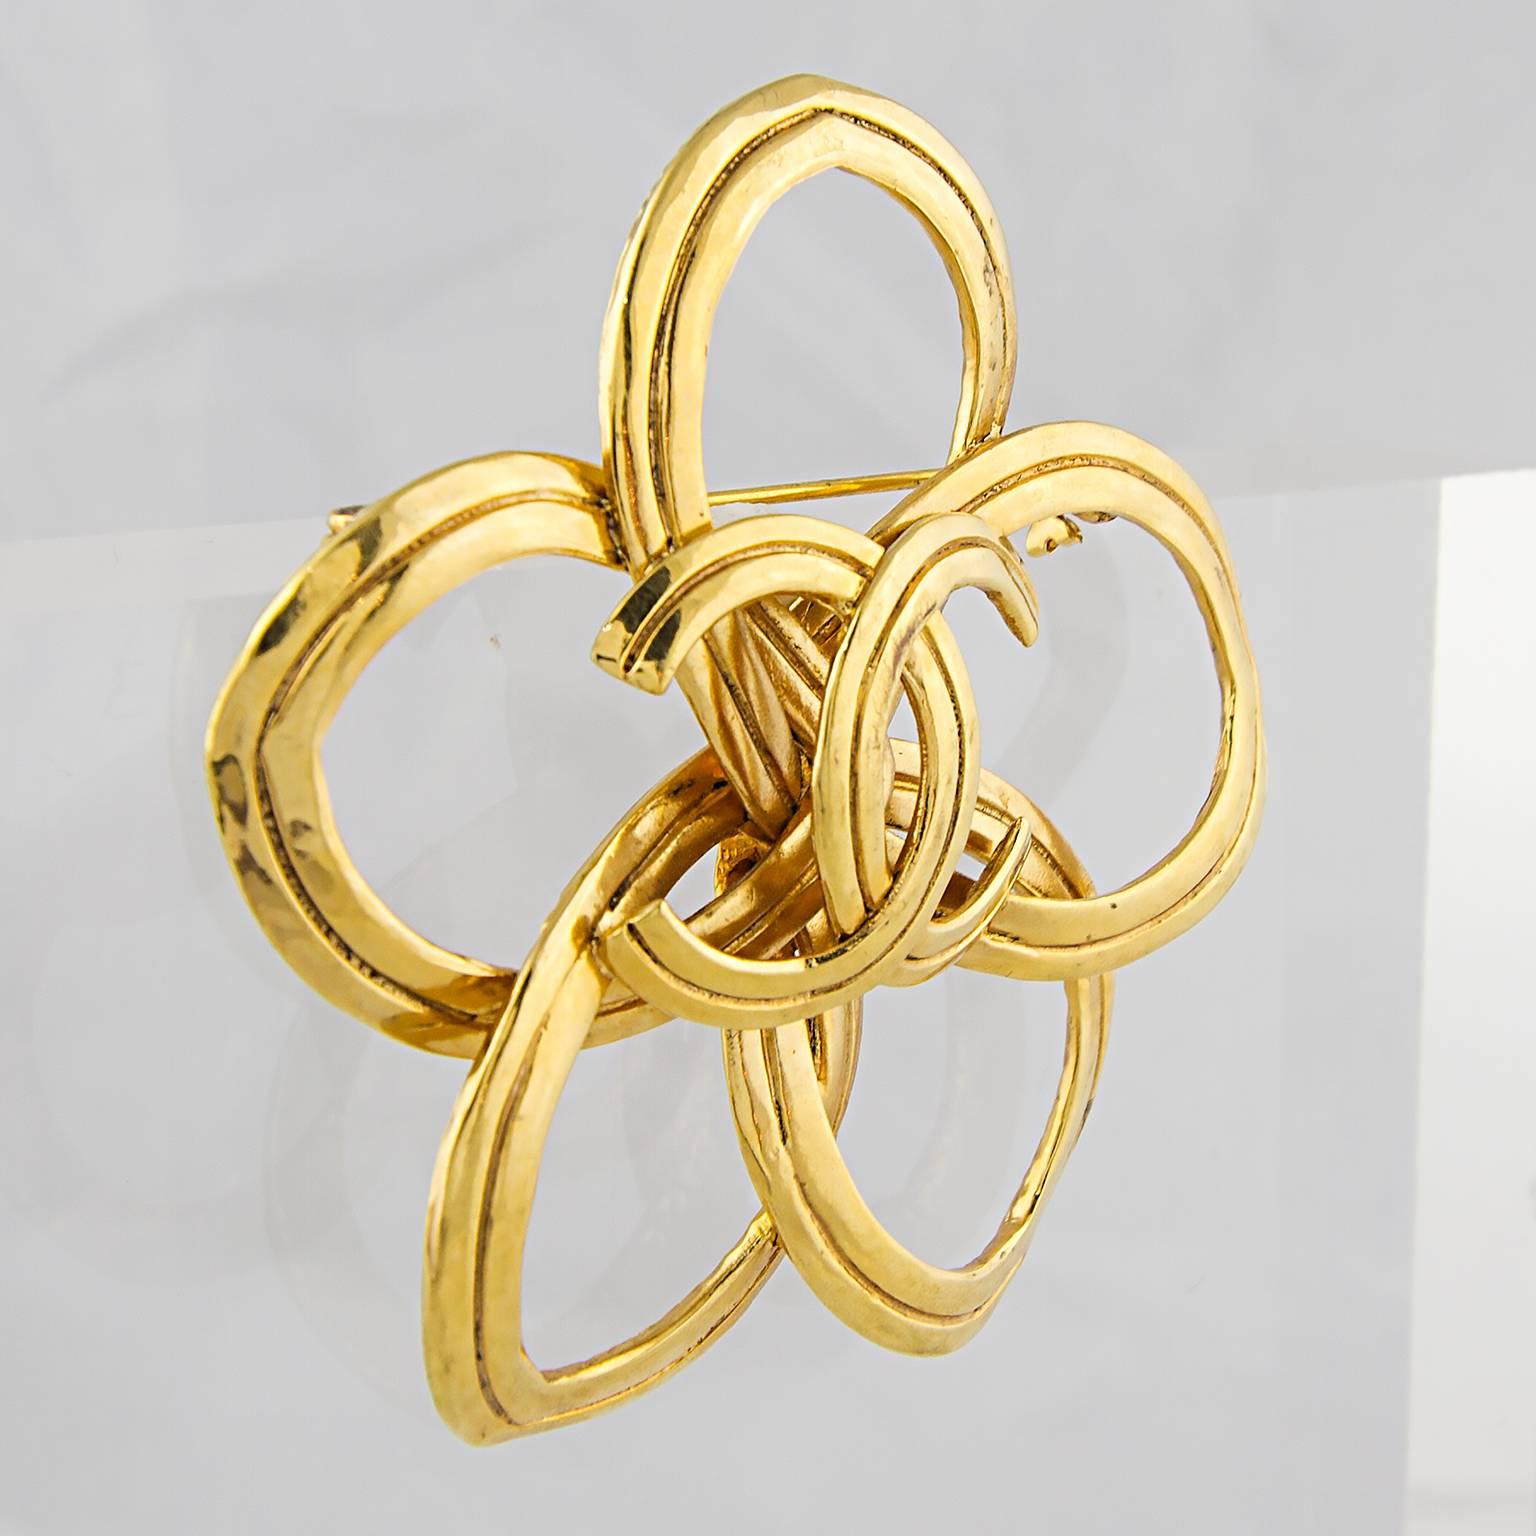 Chanel abstract brooch featuring CC logo and interlinked ovals.
High carat gold plated metal.
Made in France in for the Spring 1996 Collection.